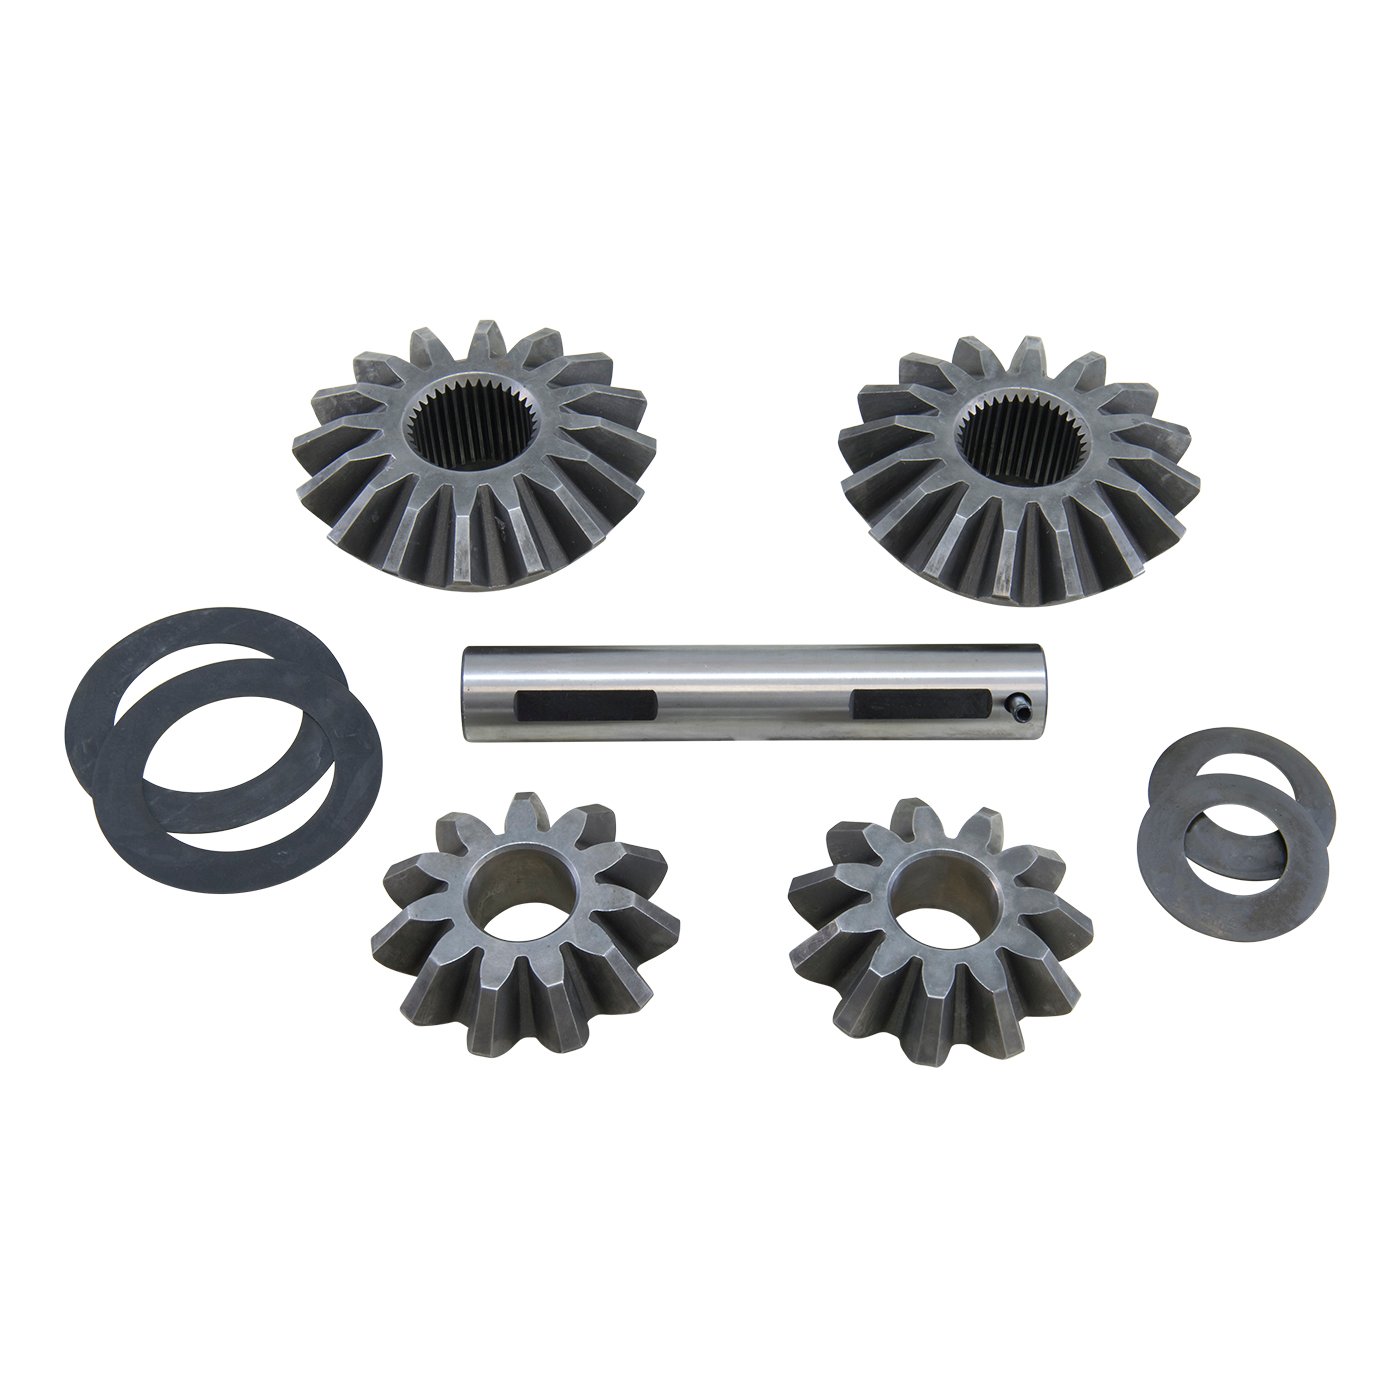 Replacement Standard Open Spider Gear Kit For Dana